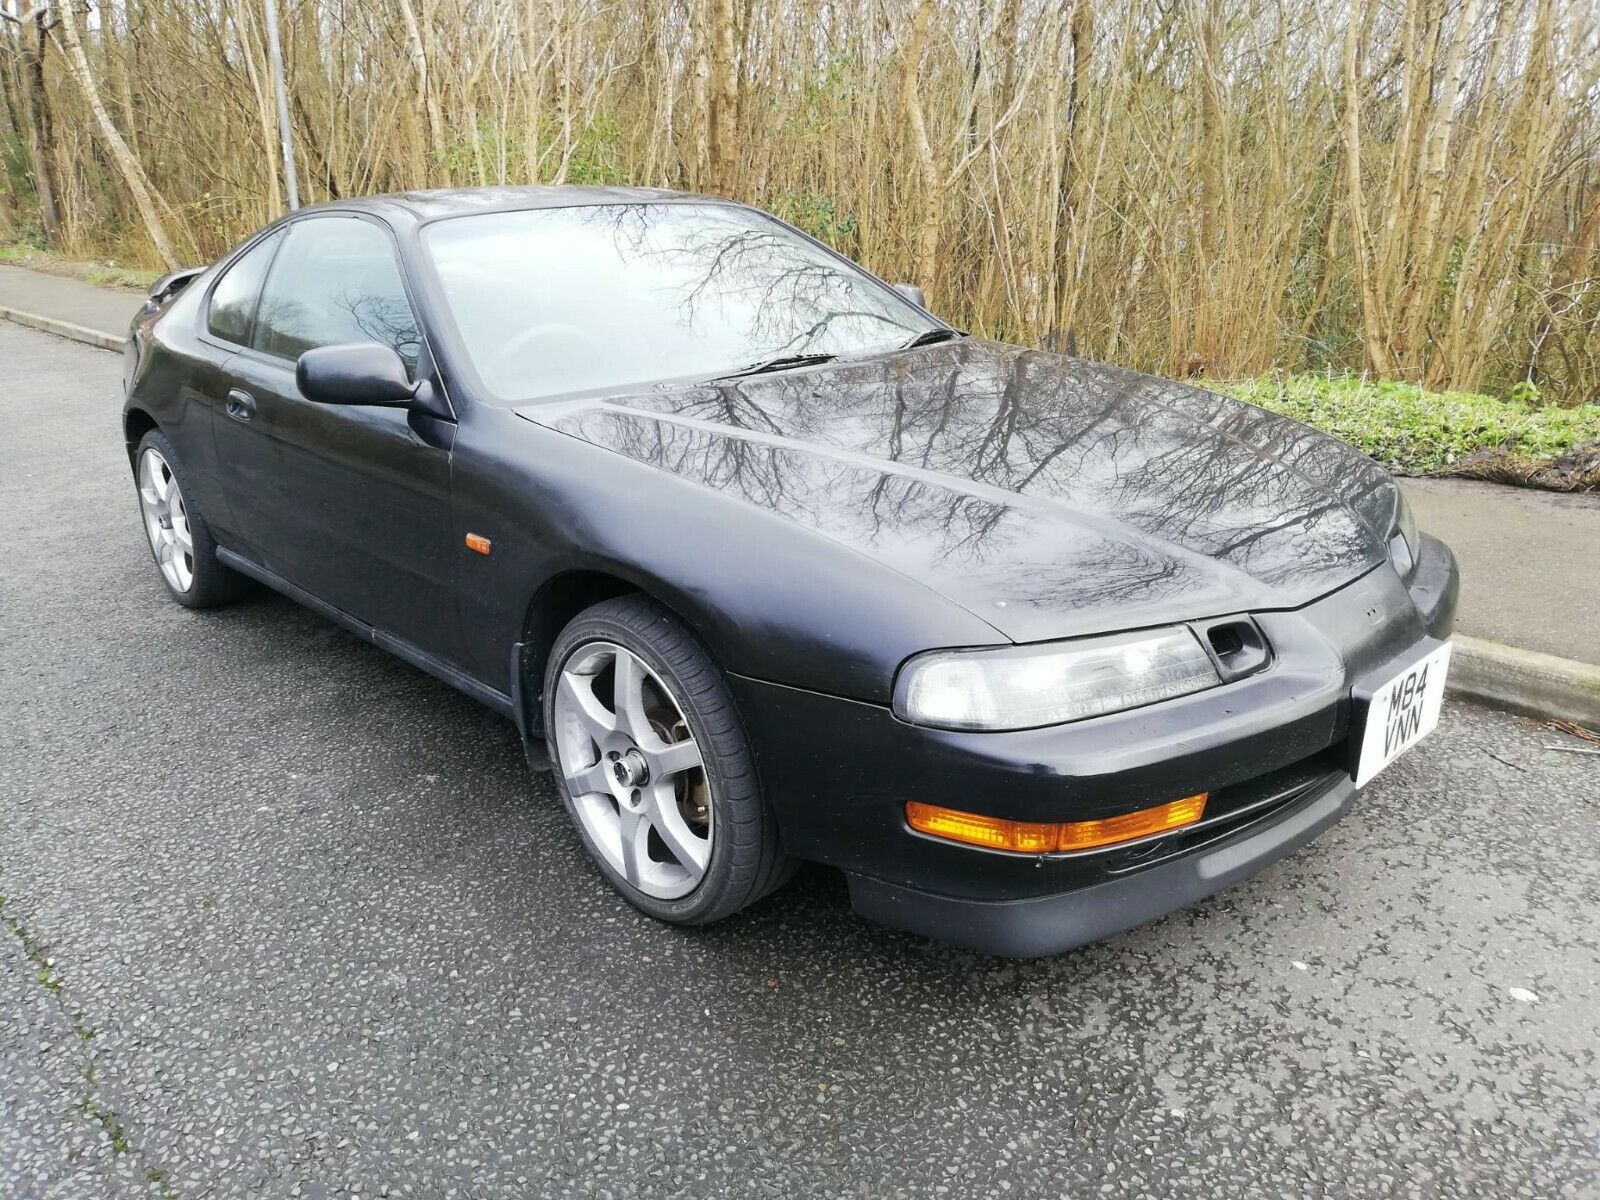 1995 Honda Prelude  SiR VTEC BB4 JDM Lightweight - Just had cambelt  service For Sale (1995) for £